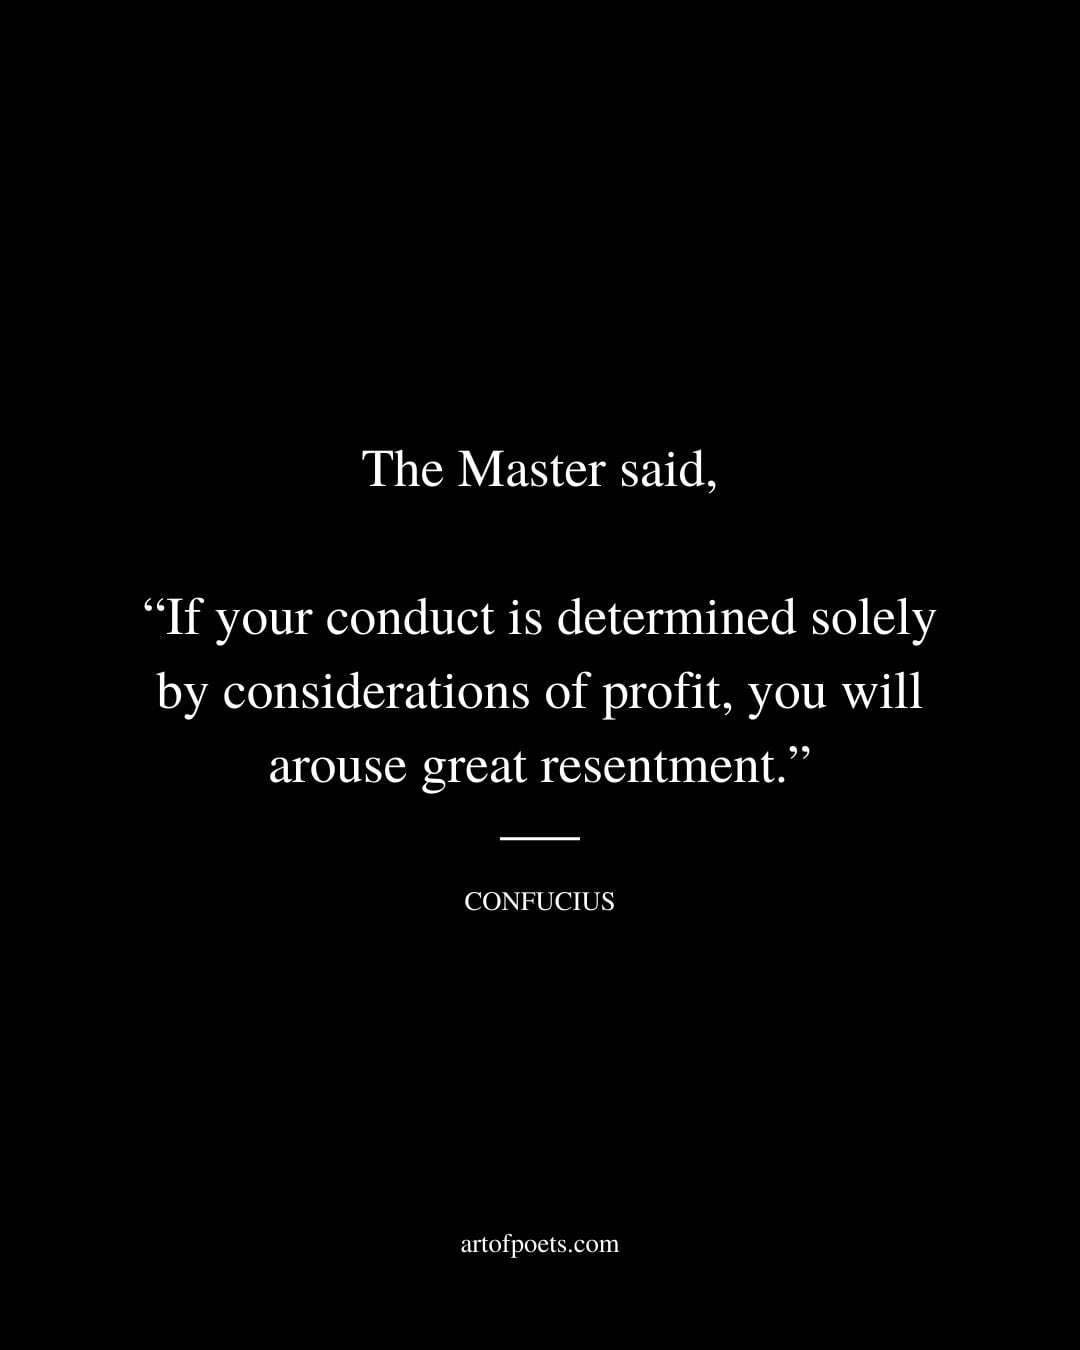 The Master said If your conduct is determined solely by considerations of profit you will arouse great resentment